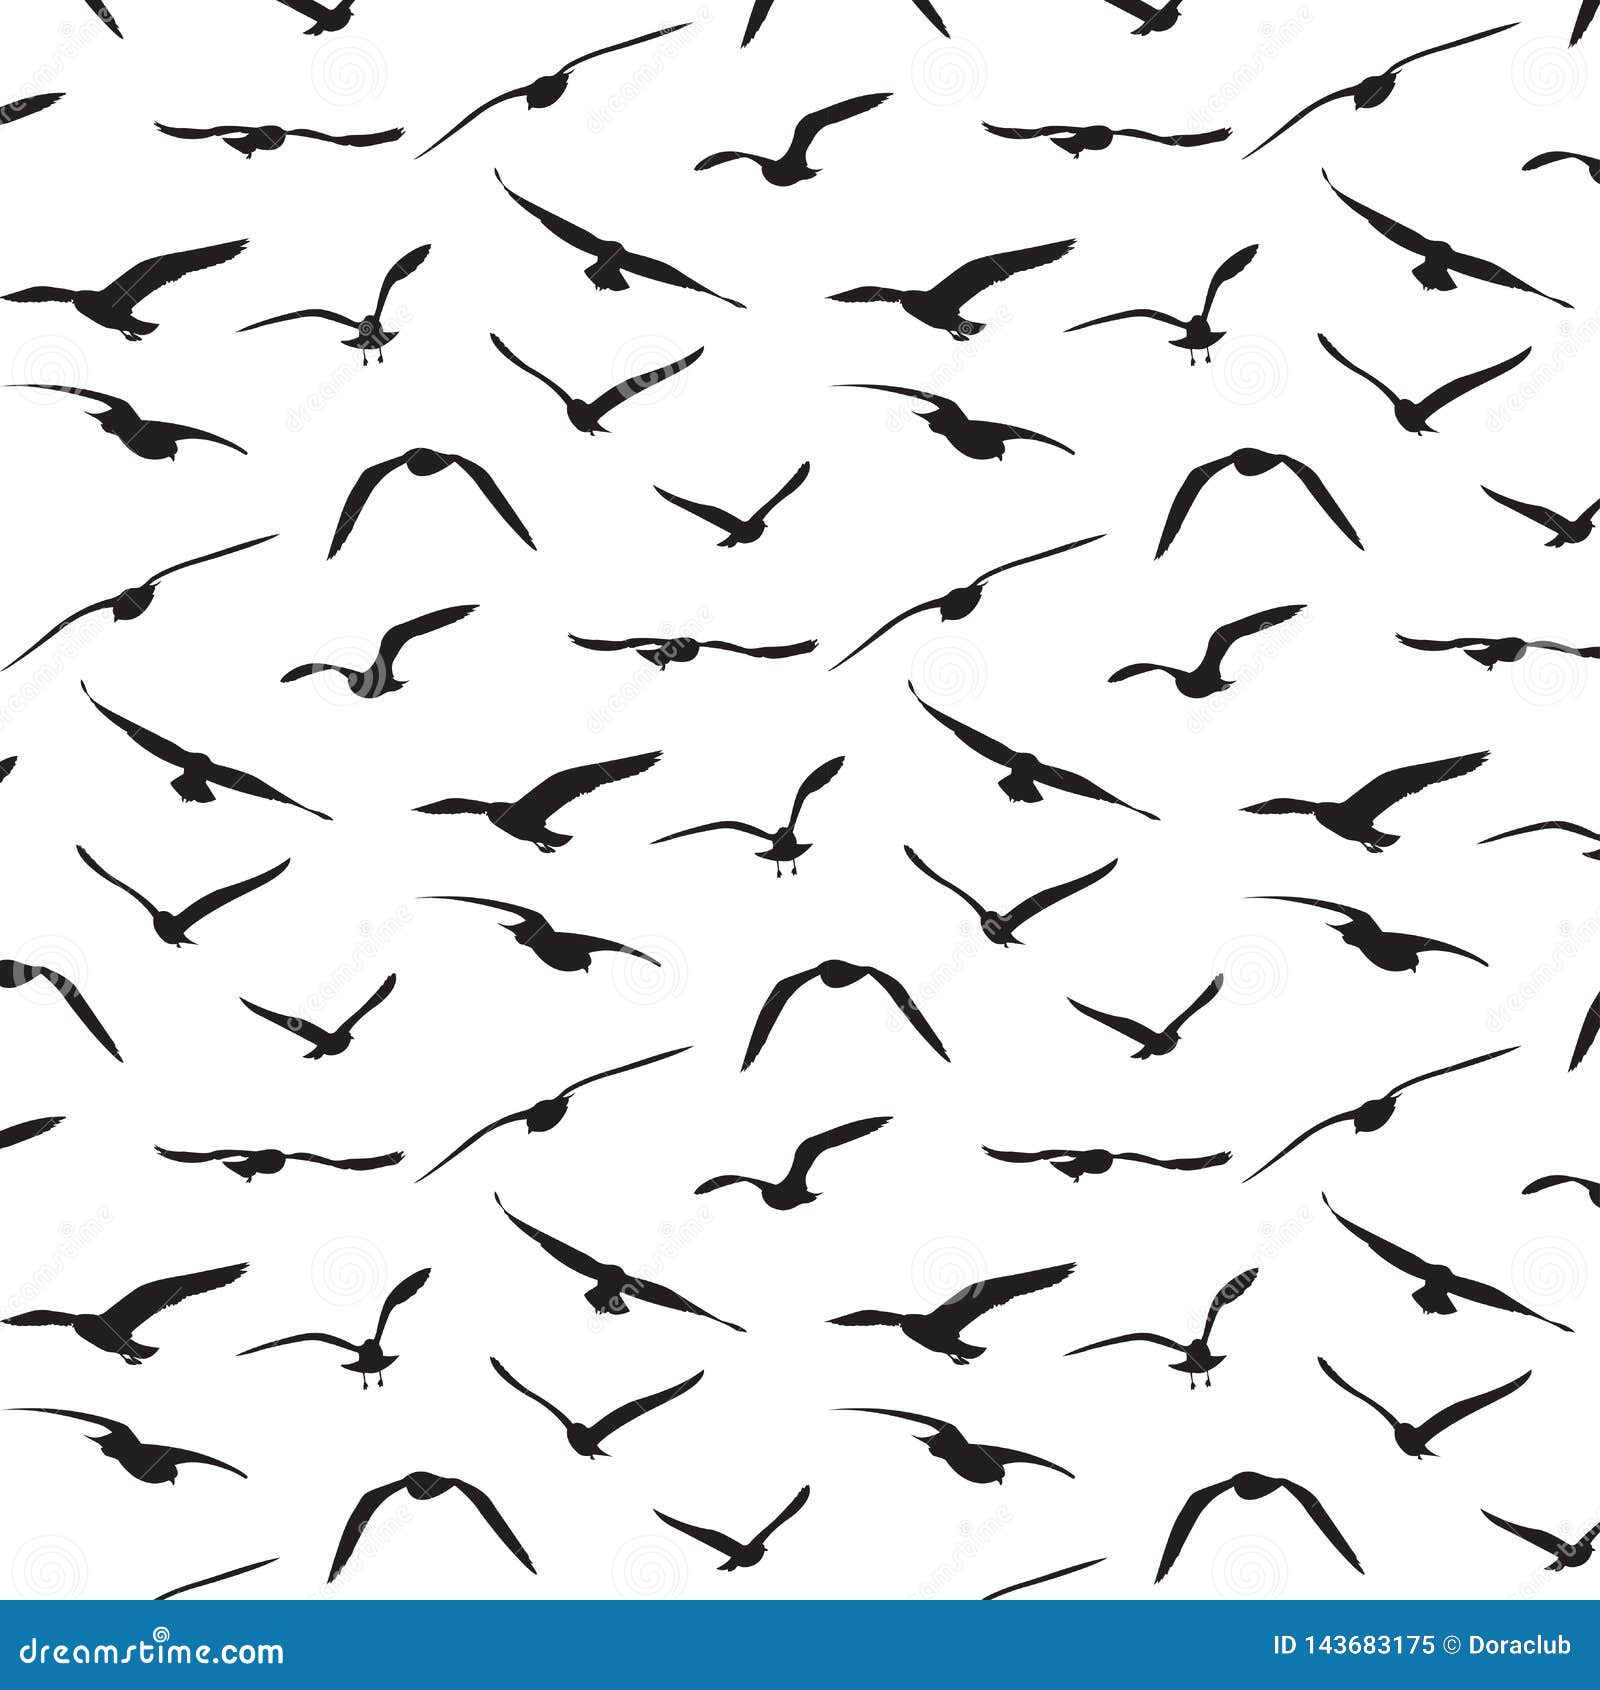 seagull silhouette pattern background